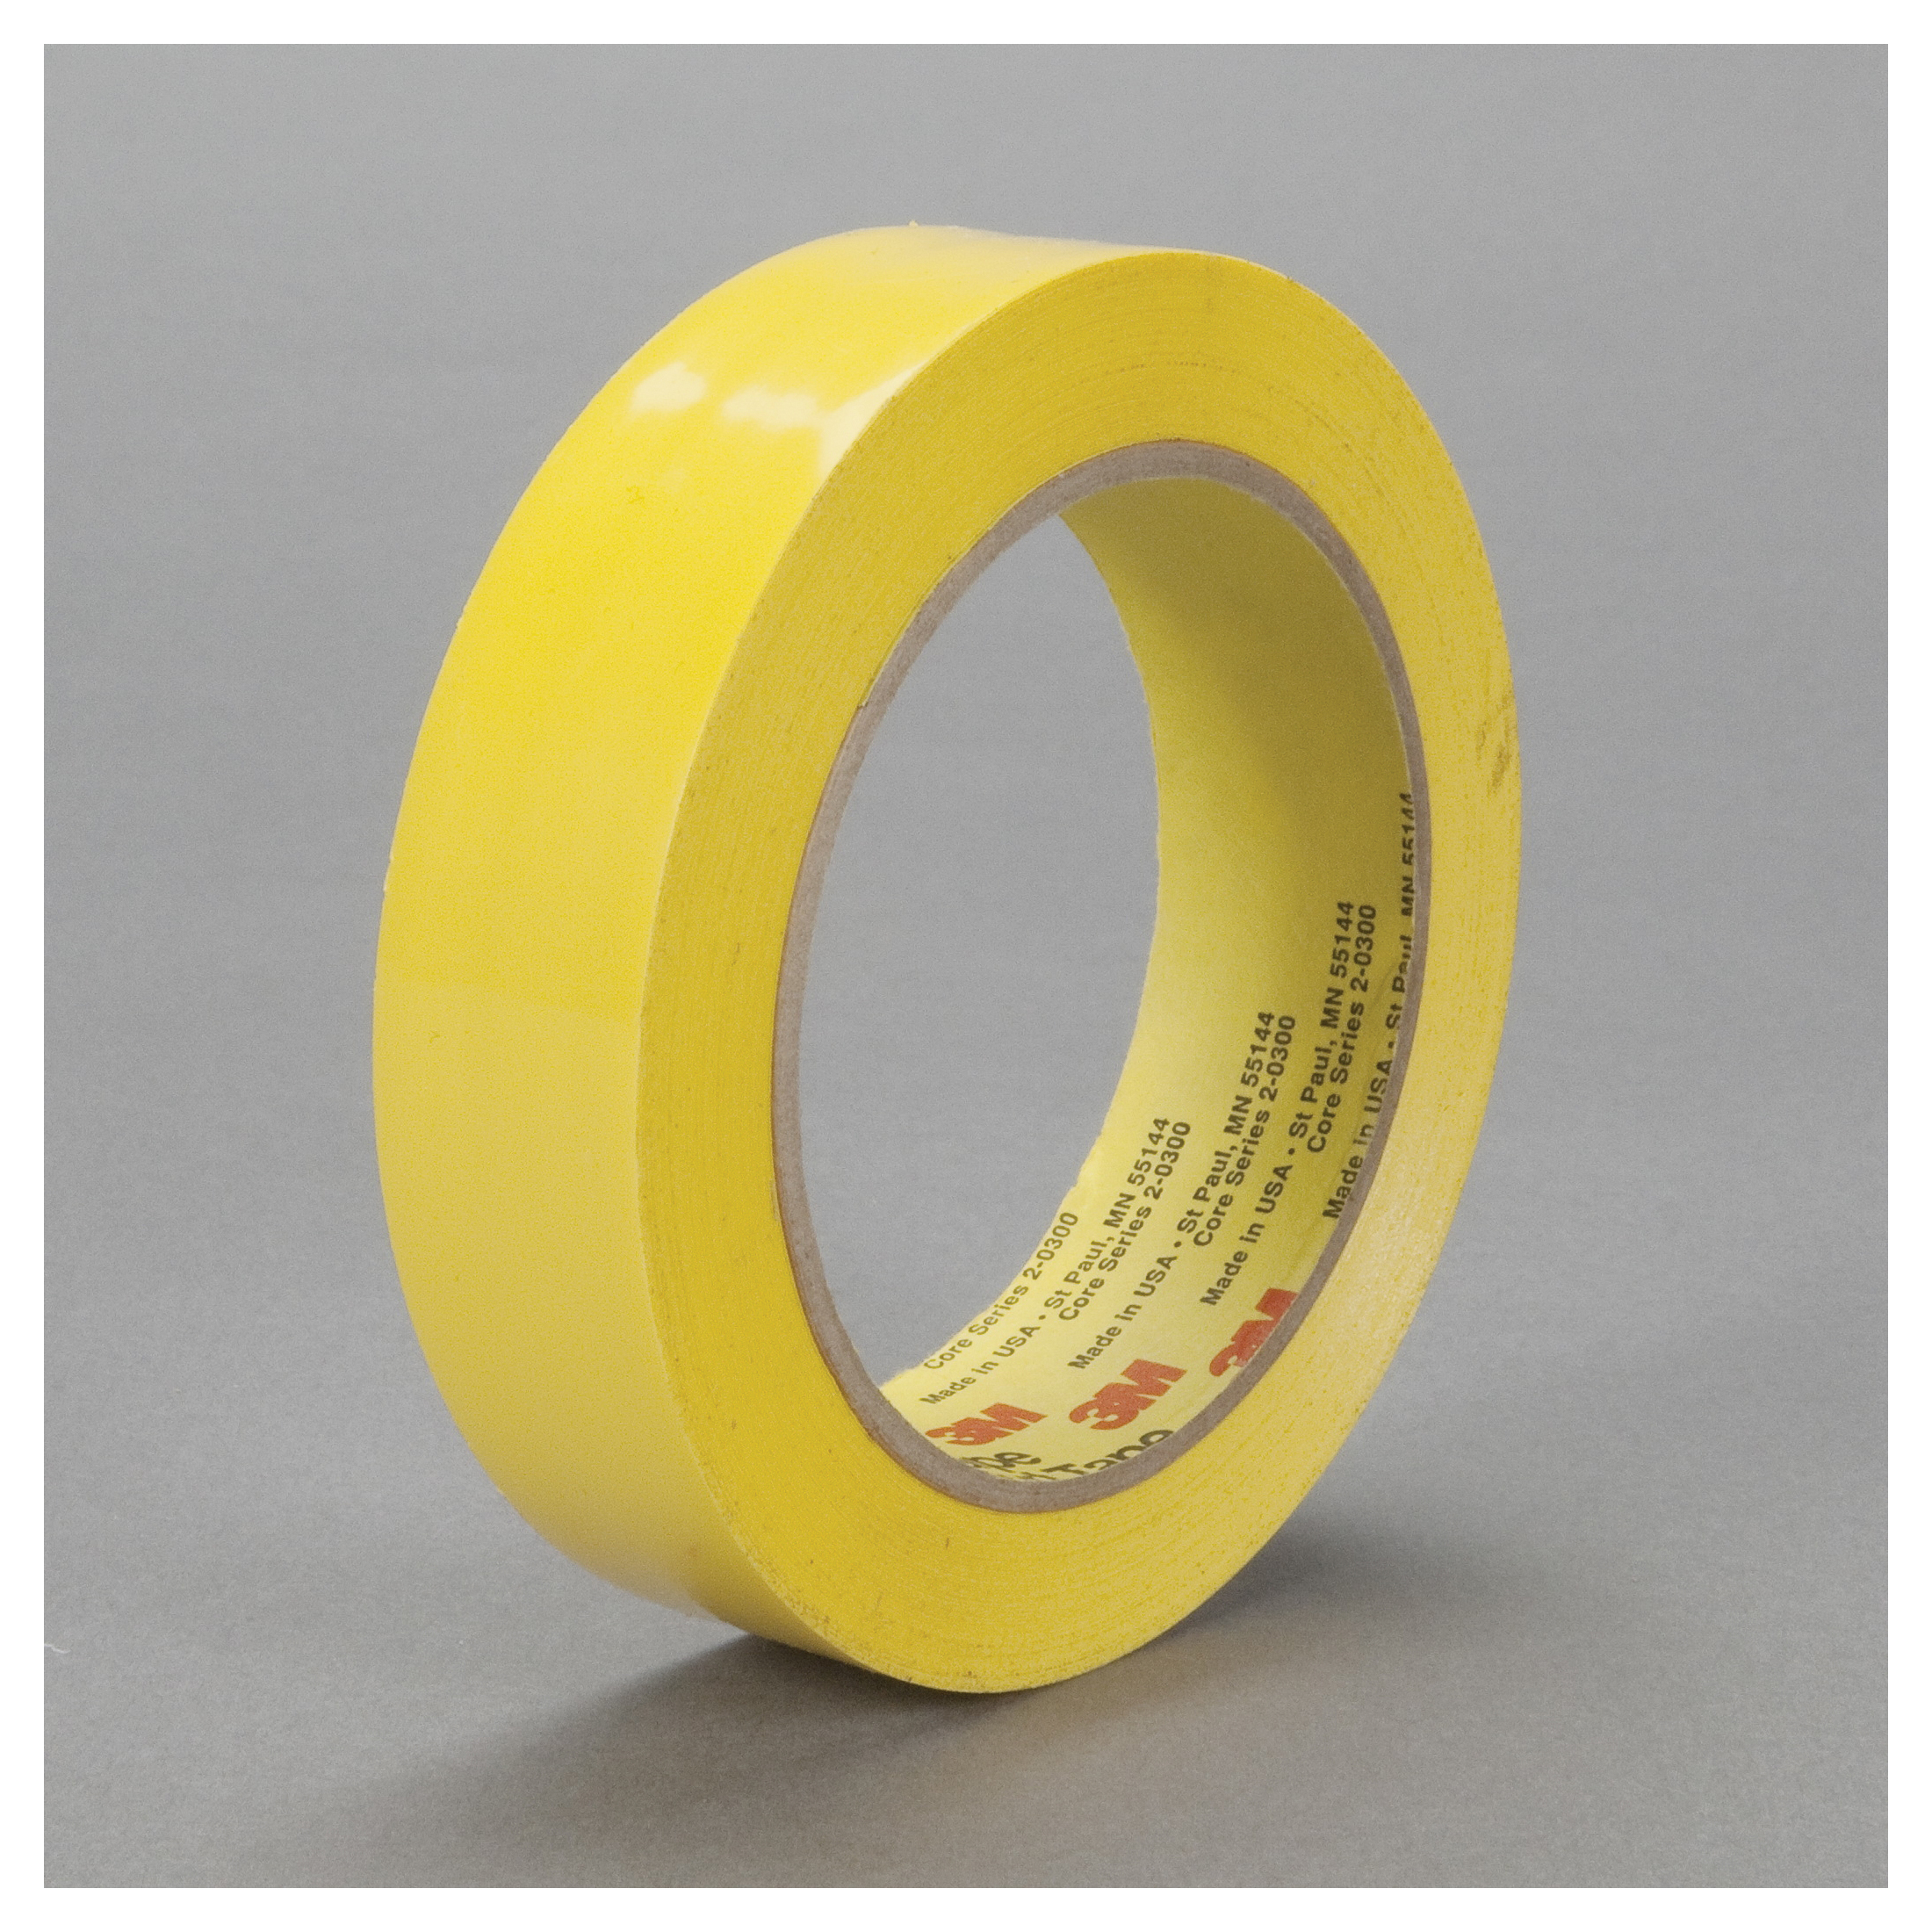 Restoration and Abatement - Tape and Adhesives - Poly Tape and Shrink Tape  - Multi-Purpose Film Tape, Blue, 3 in x 55 m, 7 mil